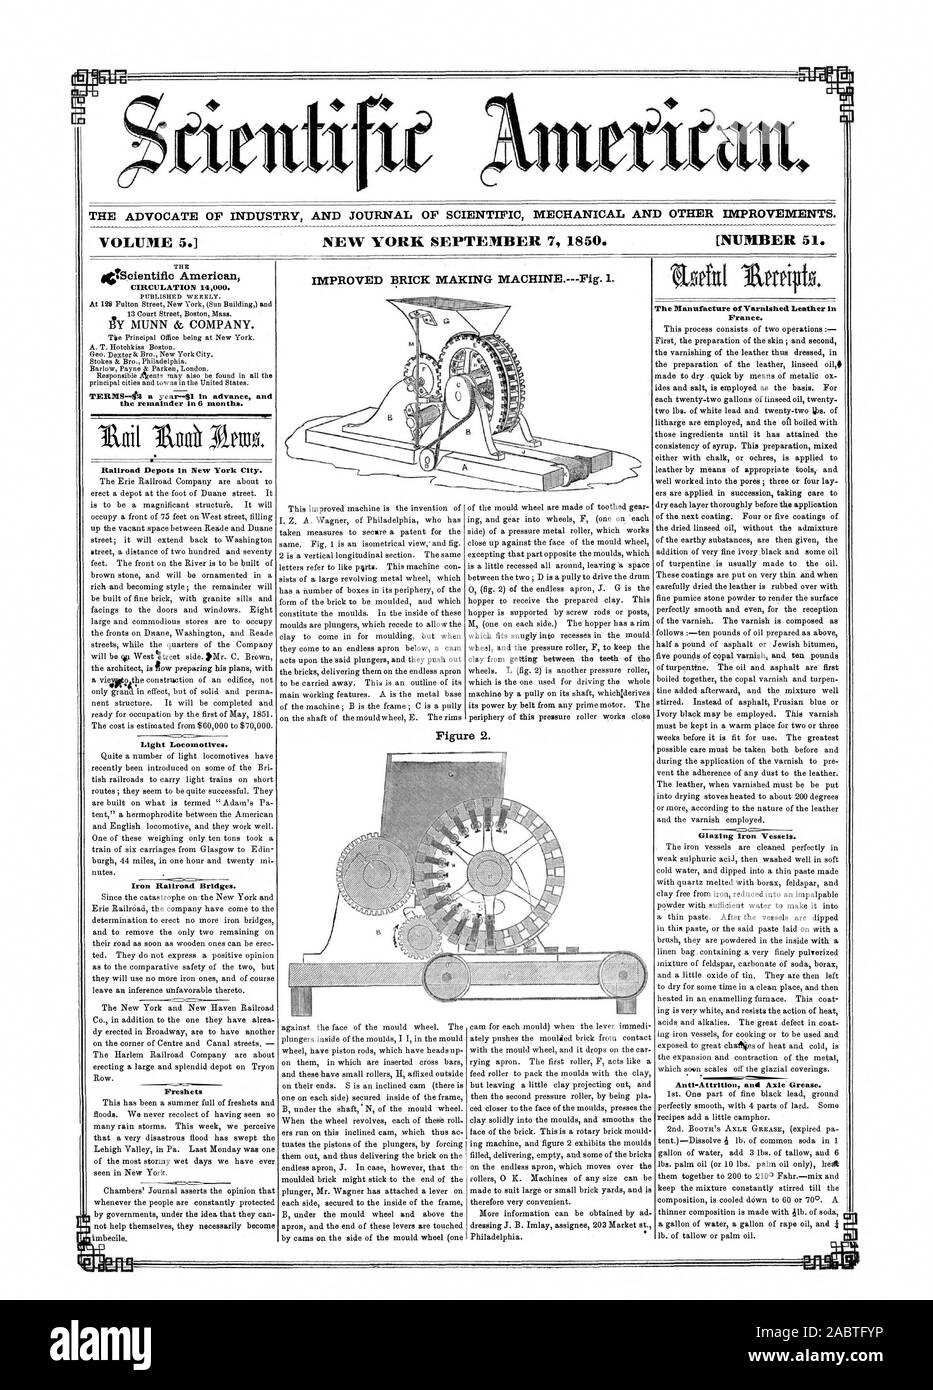 THE ADVOCATE OF INDUSTRY AND JOURNAL OF SCIENTIFIC MECHANICAL AND OTHER IMPROVEMENTS. VOLUME 5. NEW YORK SEPTEMBER 7 1850. [NUMBER 51. IMPROVED BRICK MAKING MACHINE.Fig. 1. THE iieScientific American CIRCULATION U1000. TERMS—id a year--$1 in advance and the remainder in 6 months. Railroad Depots in New York City. Light Locomotives. Iron Railroad Bridges. Freshets Figure 2. The Manufacture of Varnished Leather in France., 1850-09-07 Stock Photo